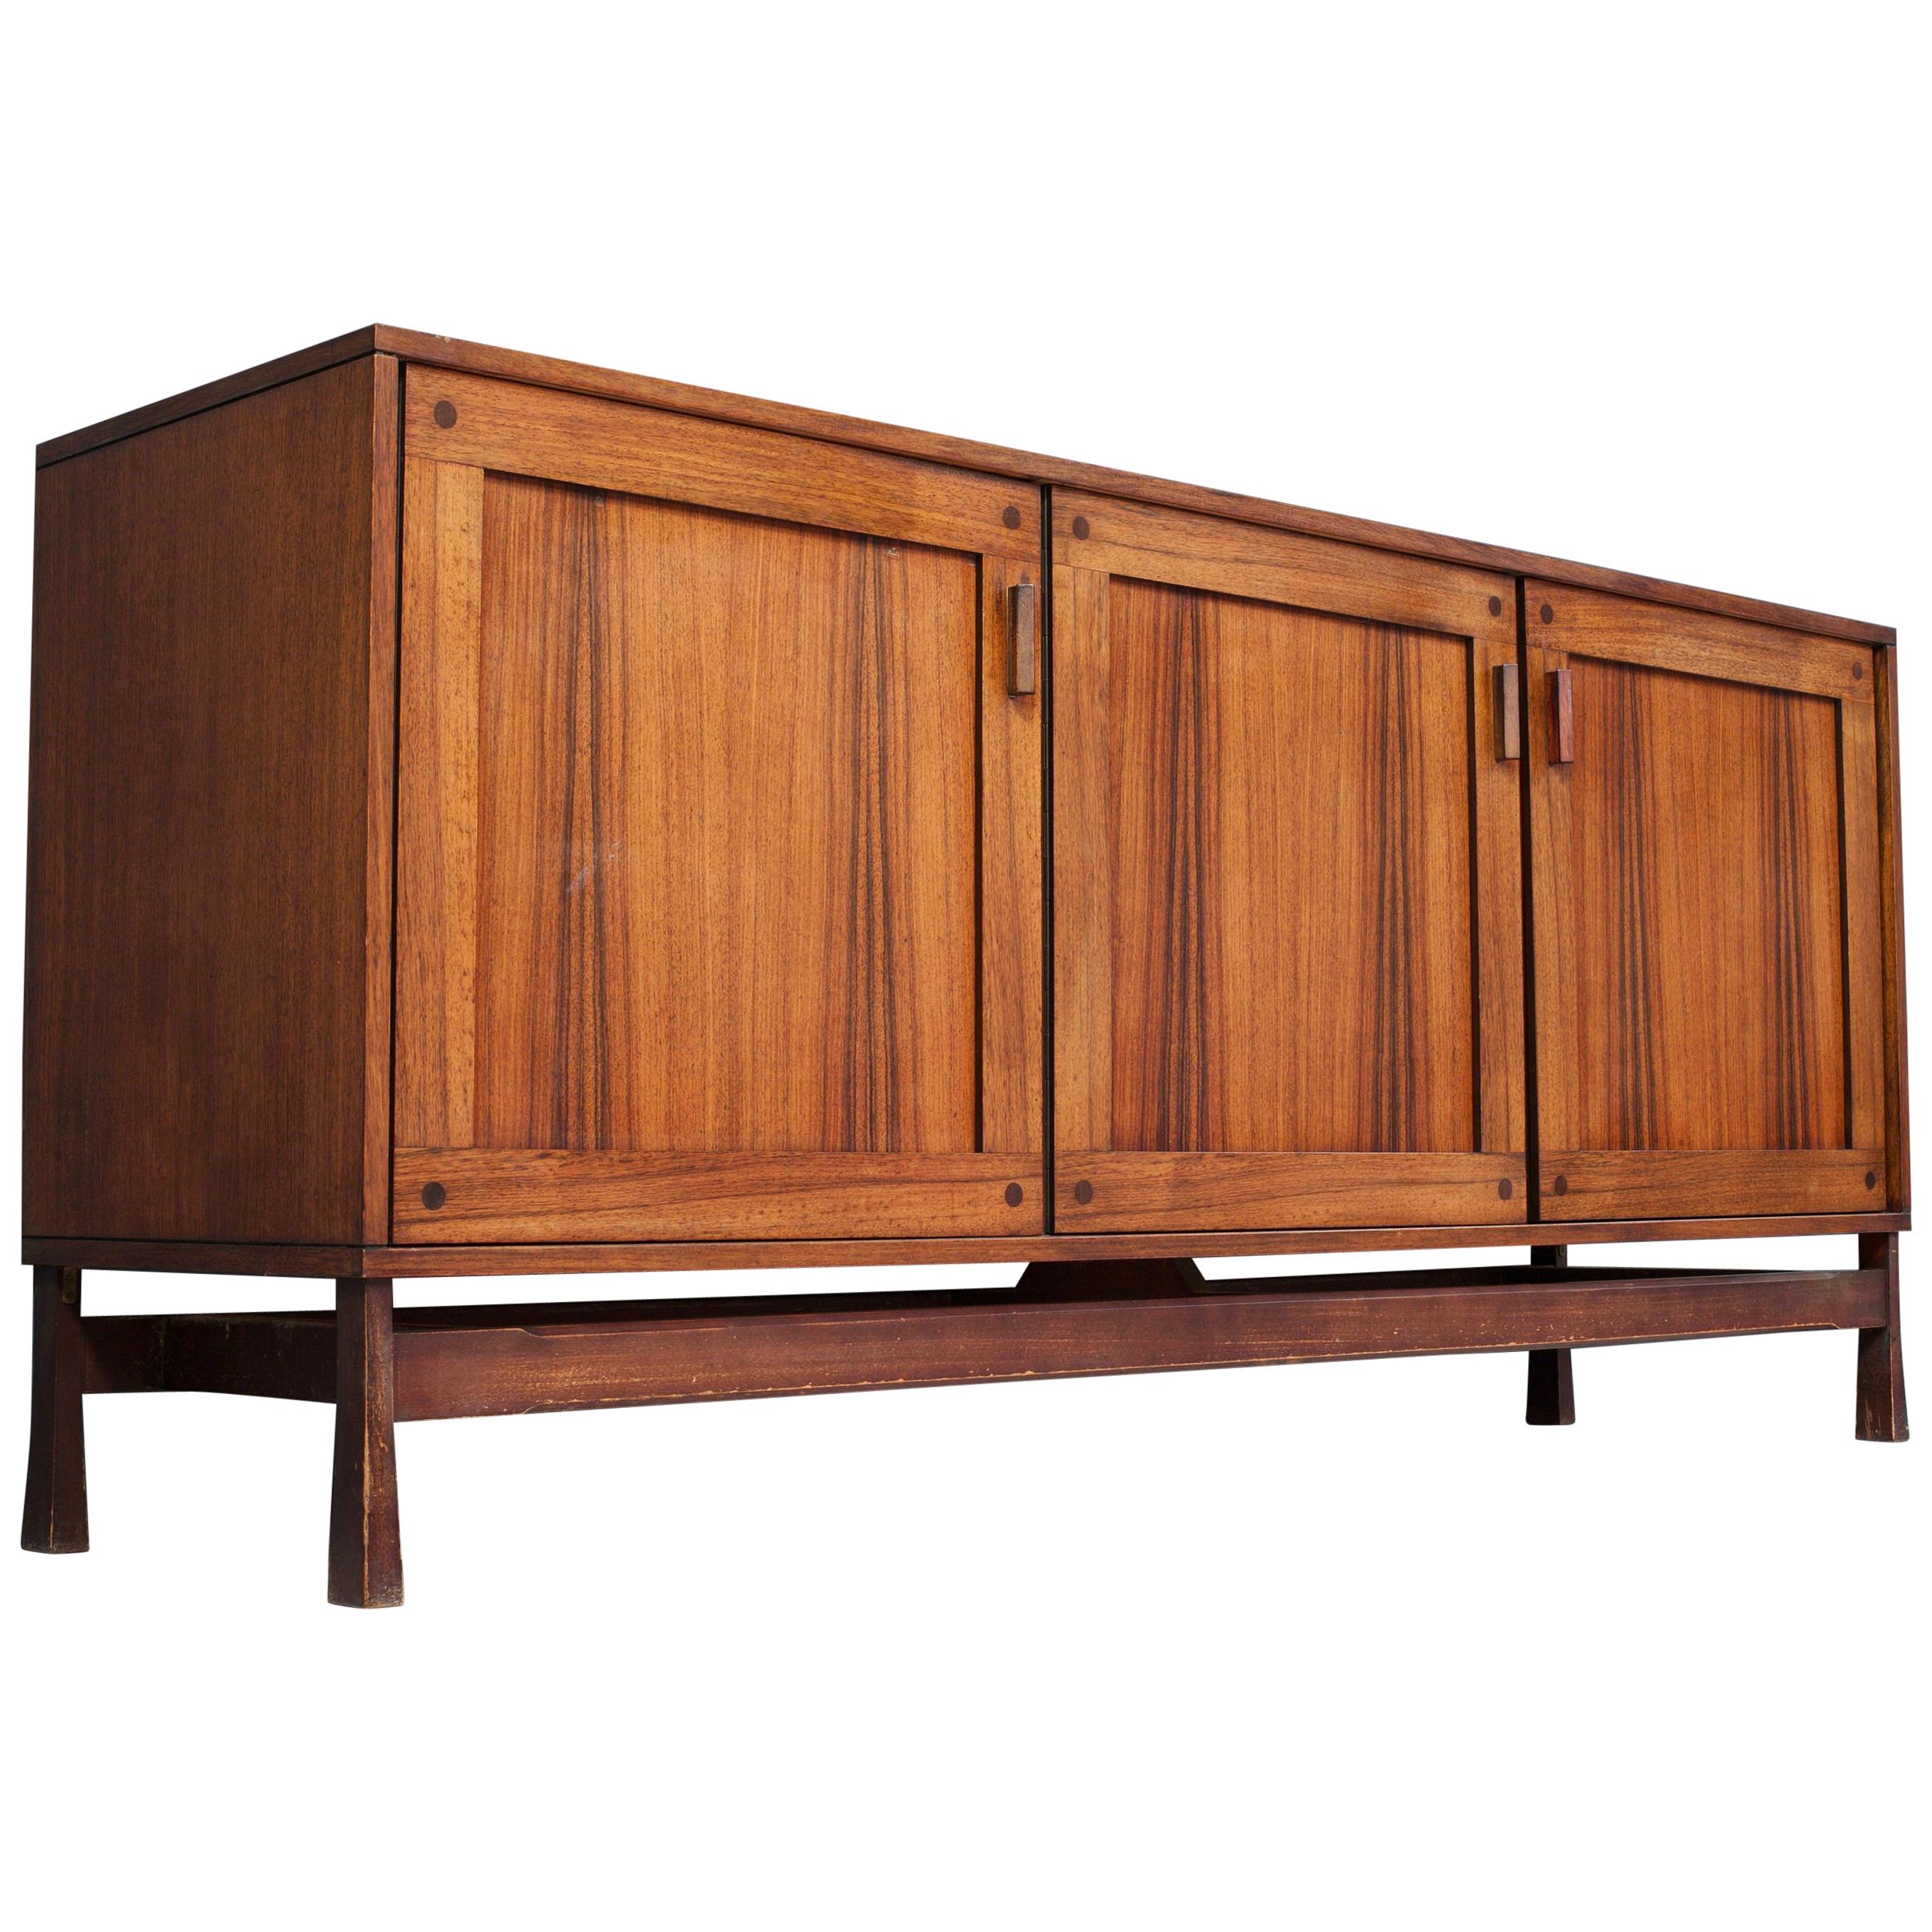 Idiosyncratic Italian Credenza with Flared Feet in Rosewood, 1970s